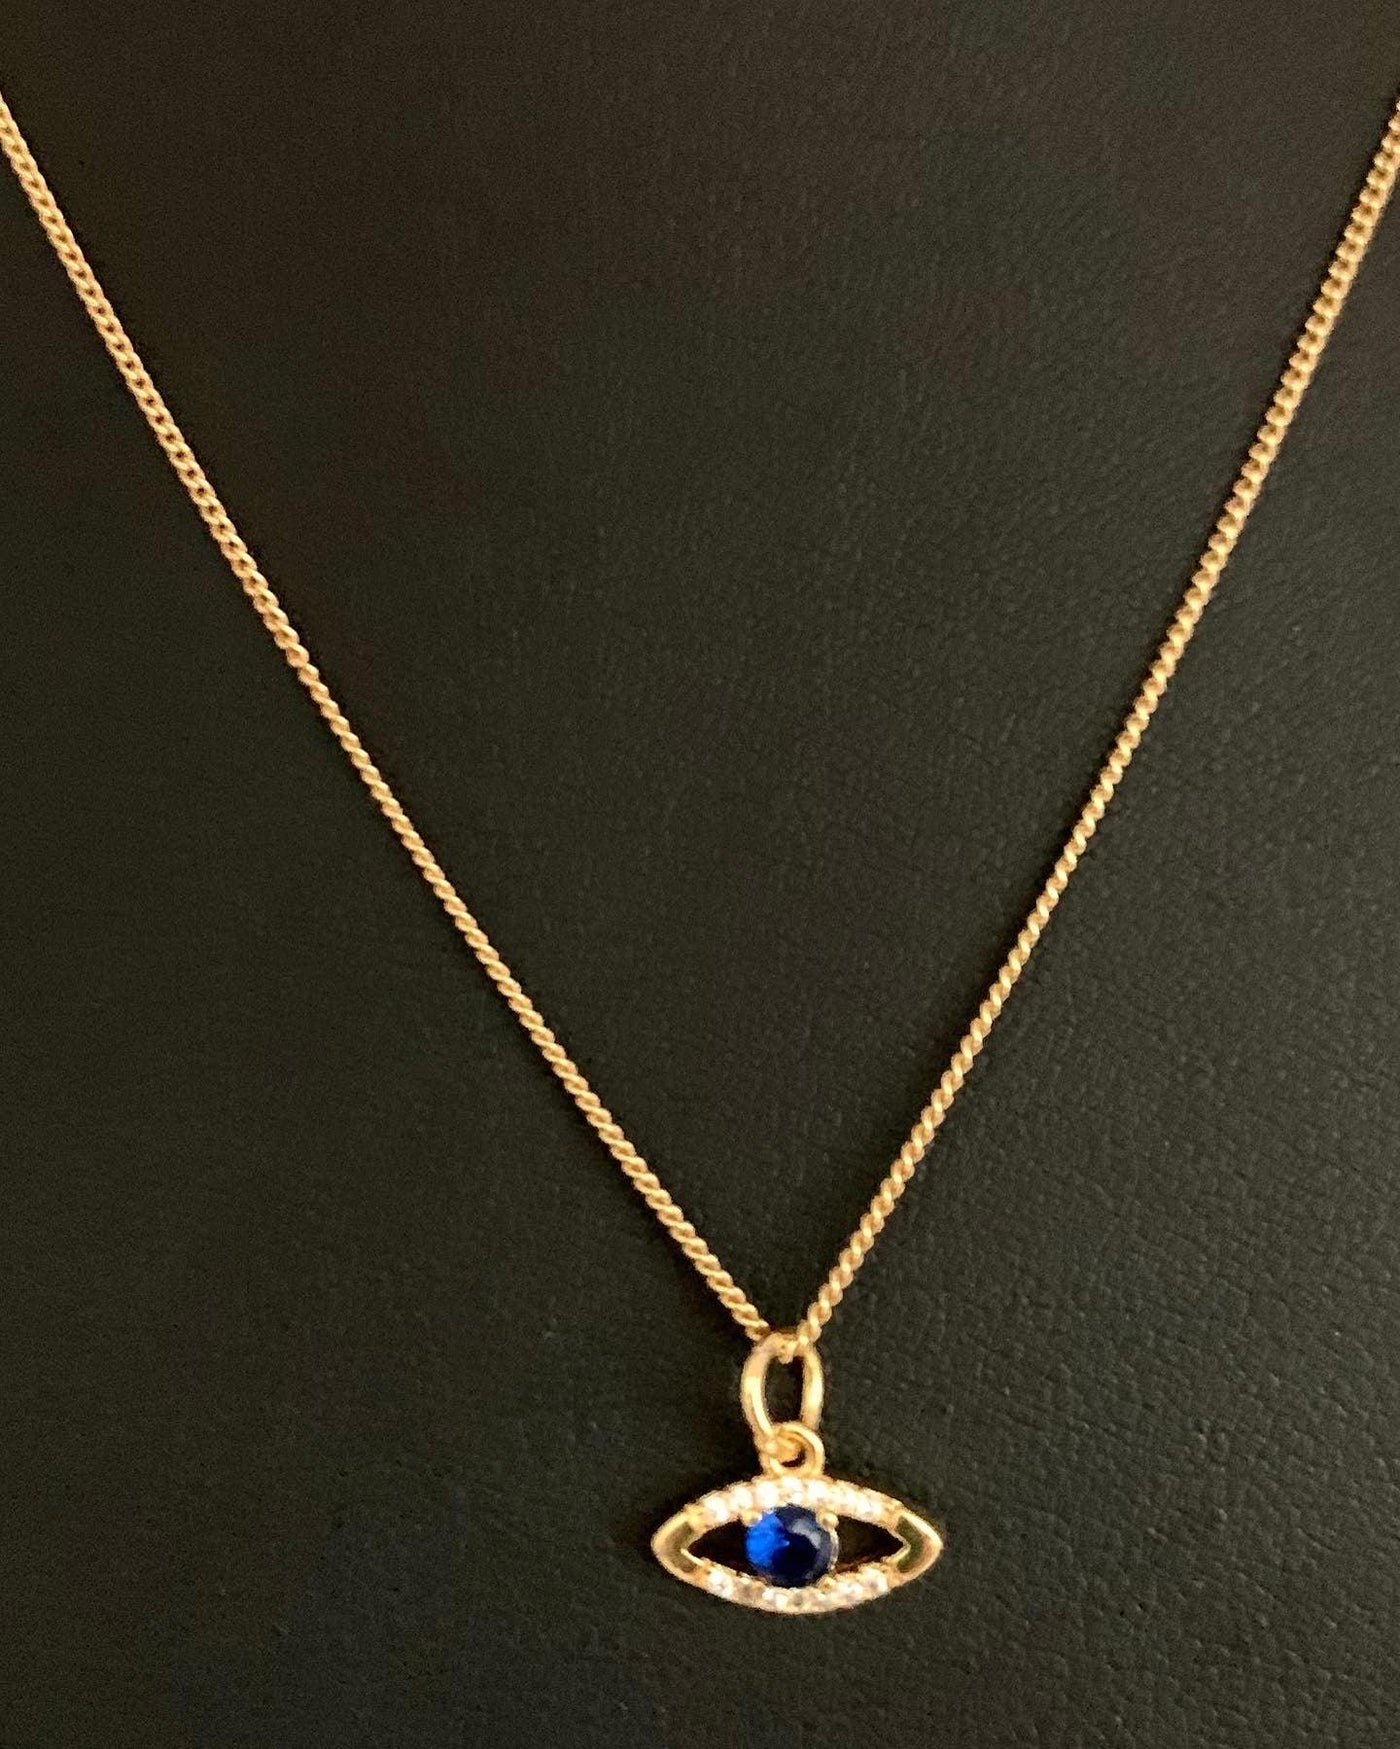 Gold Women’s pendant necklace with Gold Evil Eye - Brent's Bling